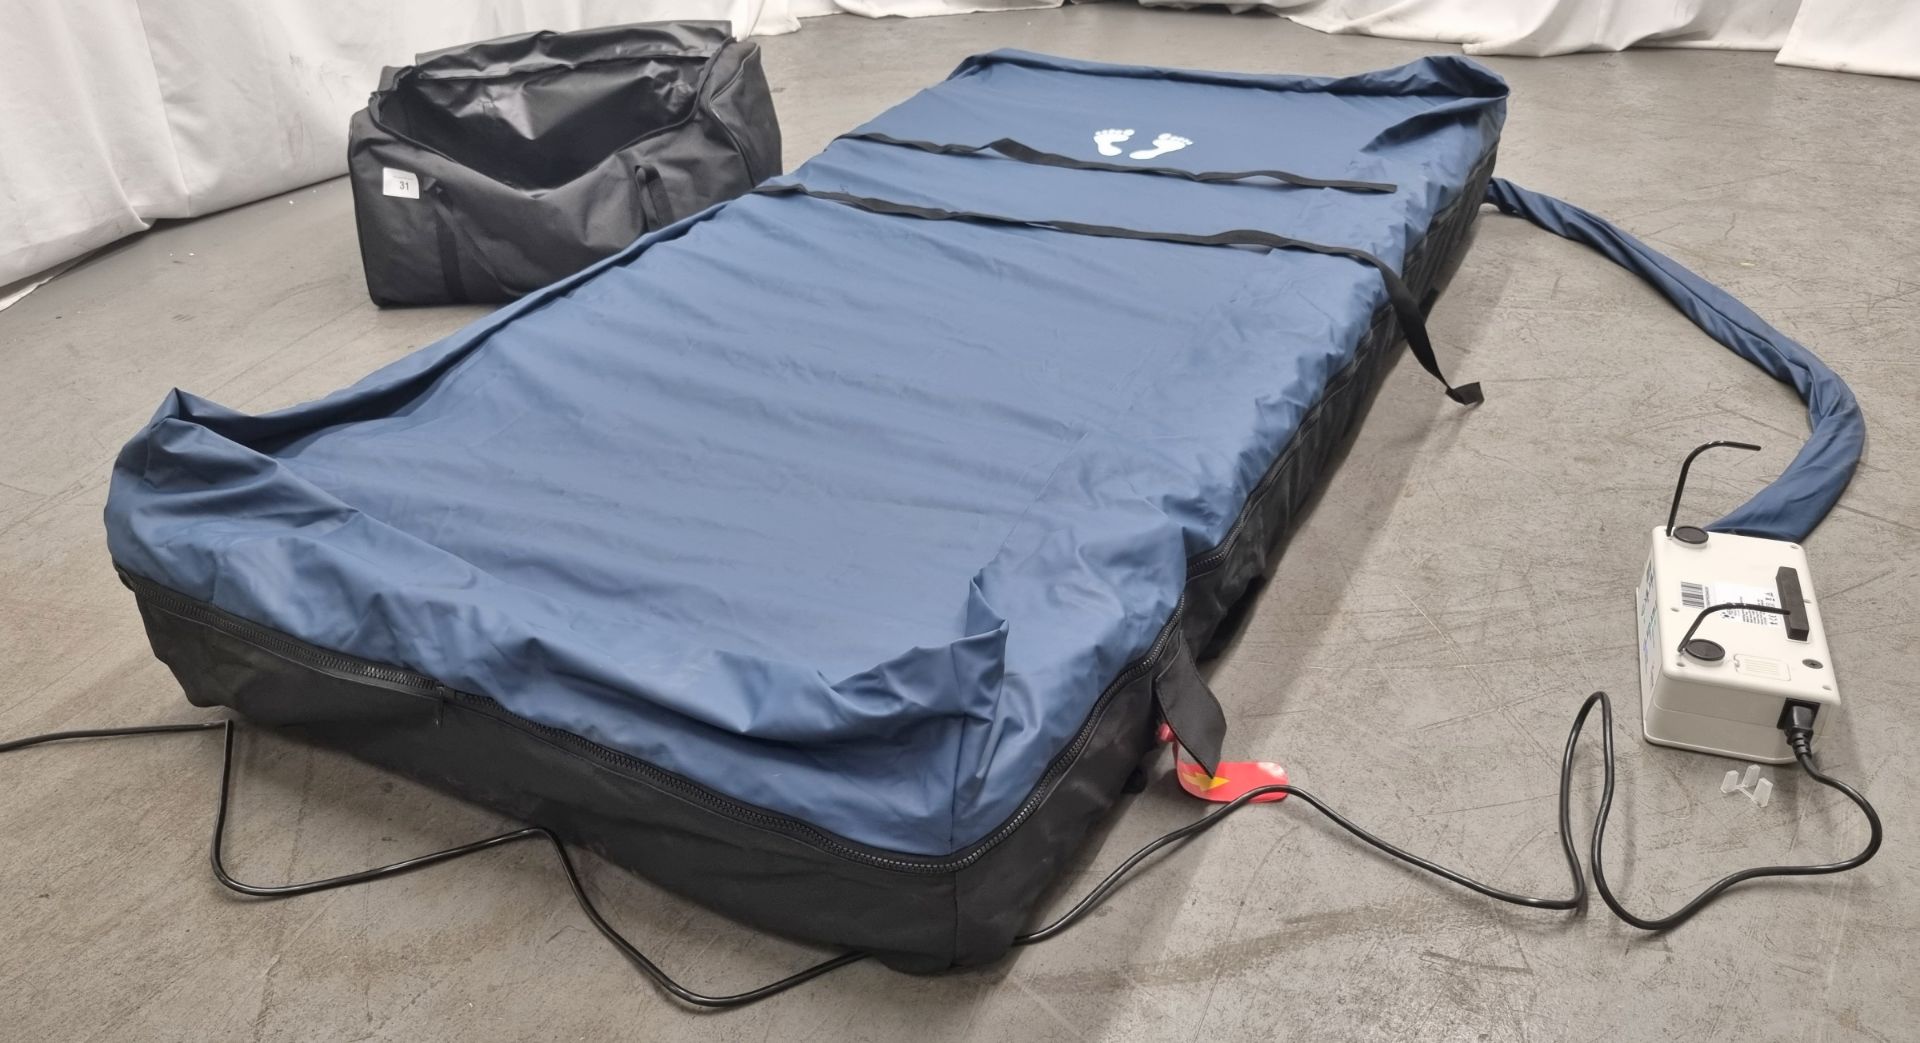 10x Herida Argyll II dynamic airflow mattress system with digital pump in carry bags (boxed) - Image 6 of 10